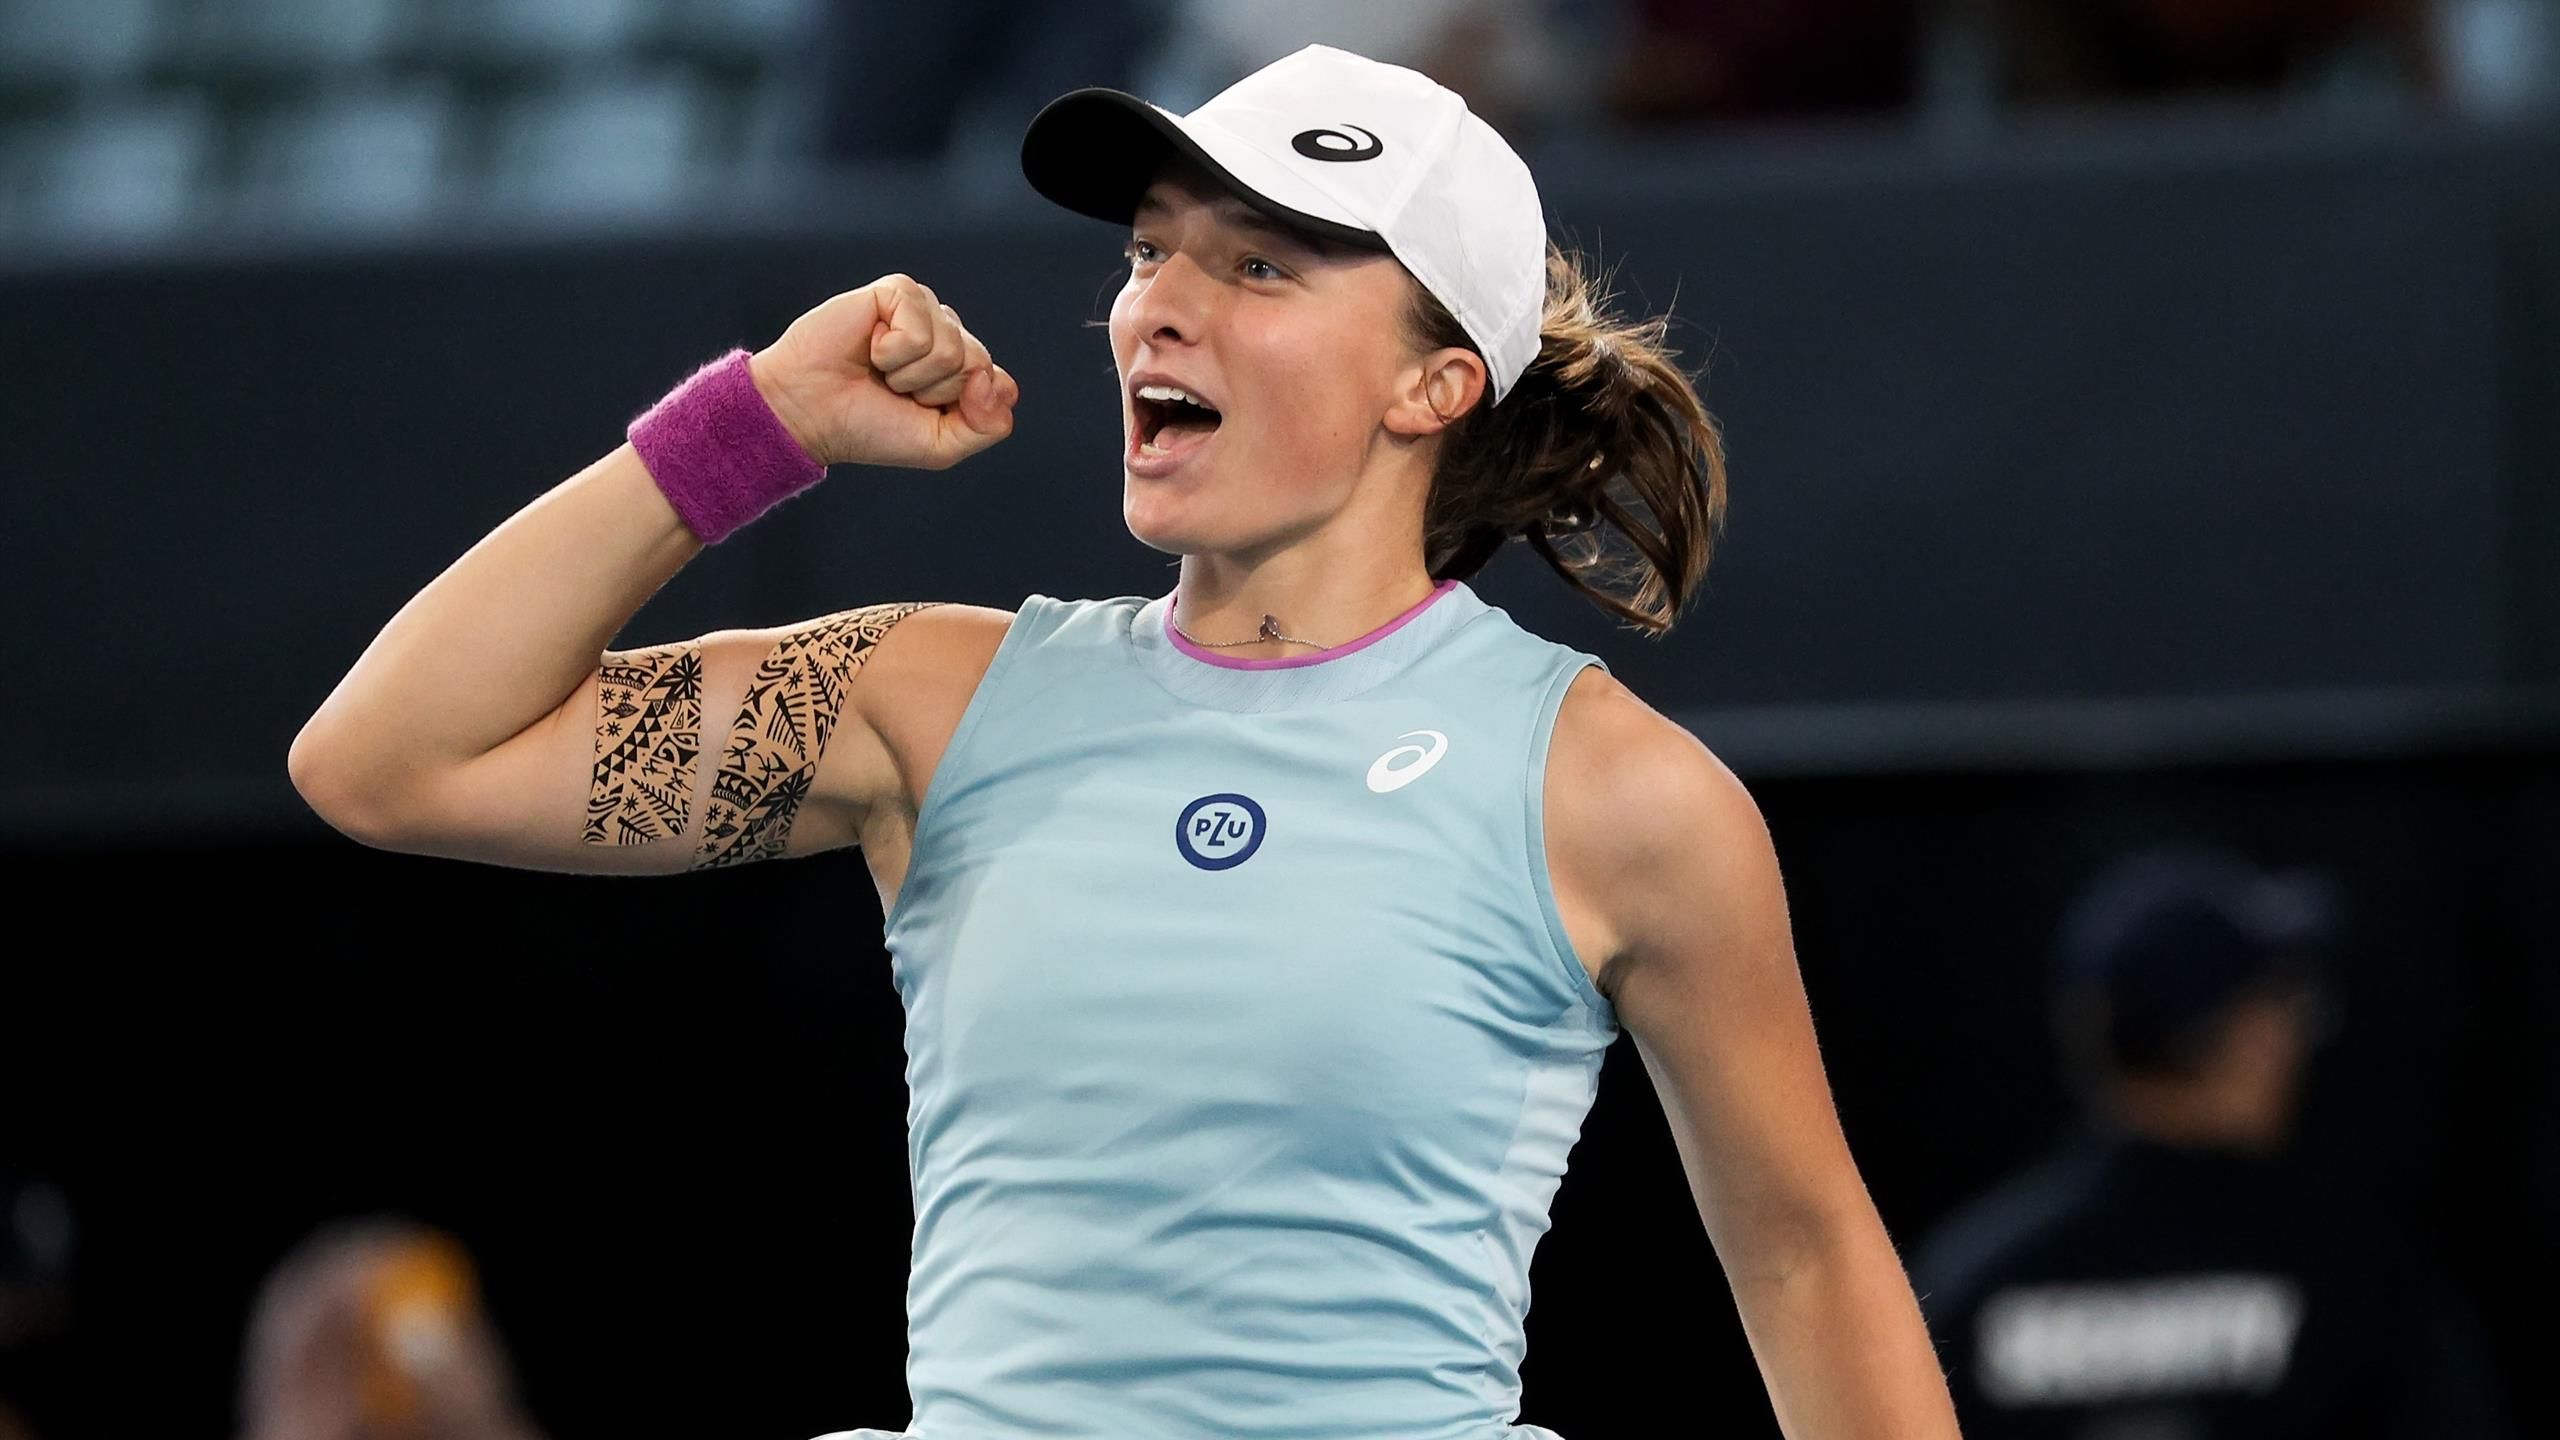 WTA tennis - Unpredictable Iga Swiatek a dominant force here to stay after Adelaide triumph